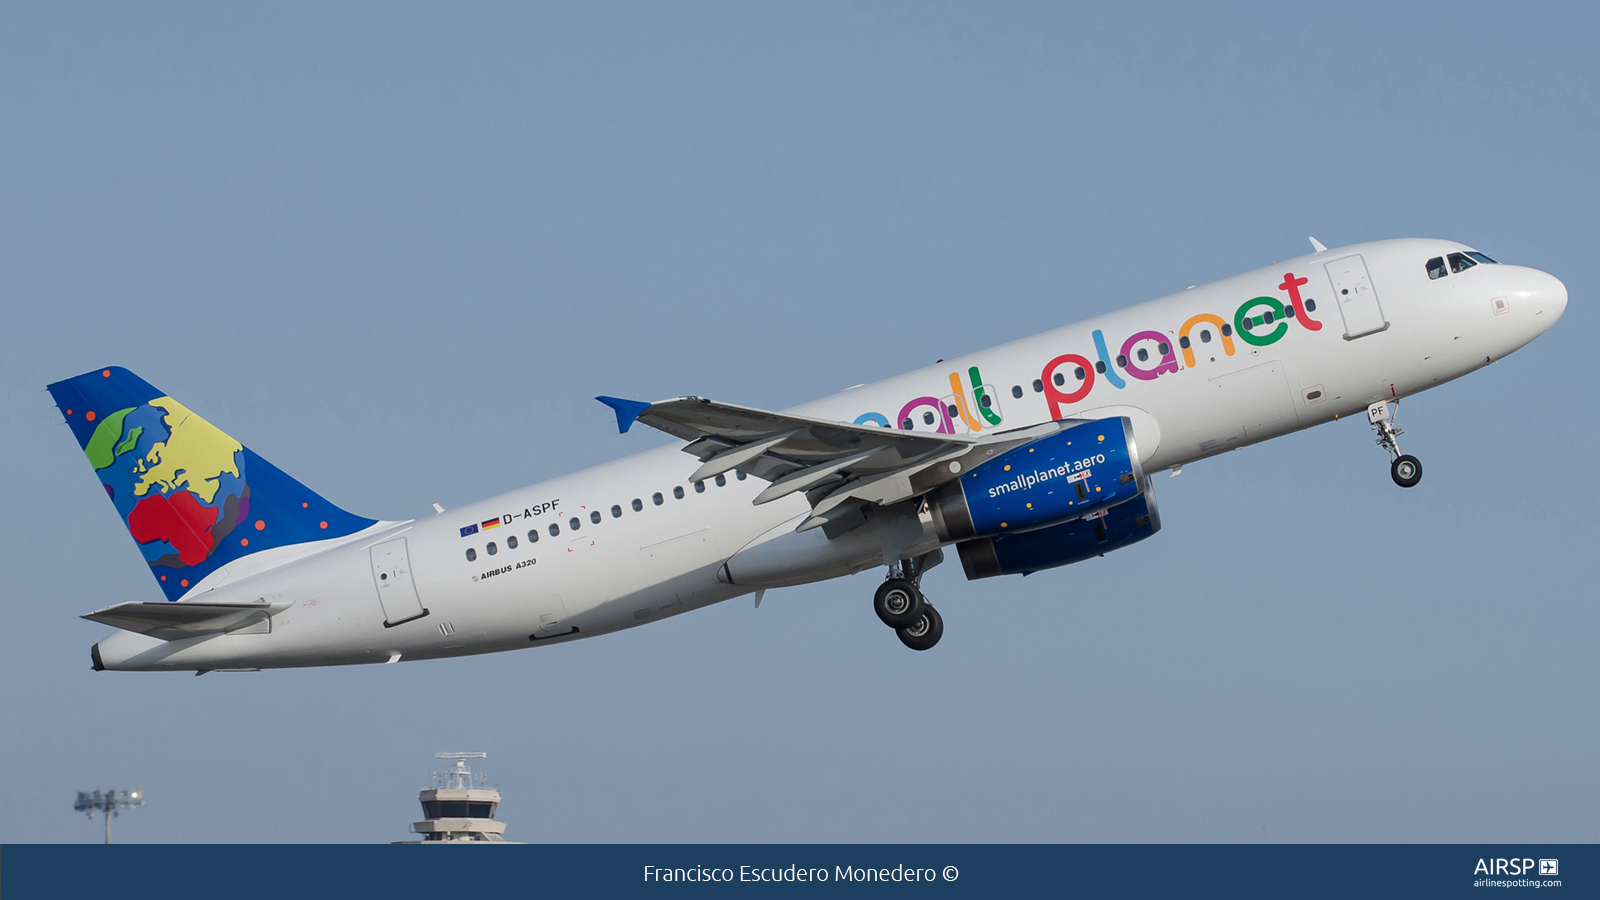 Small Planet Airlines  Airbus A320  D-ASPF